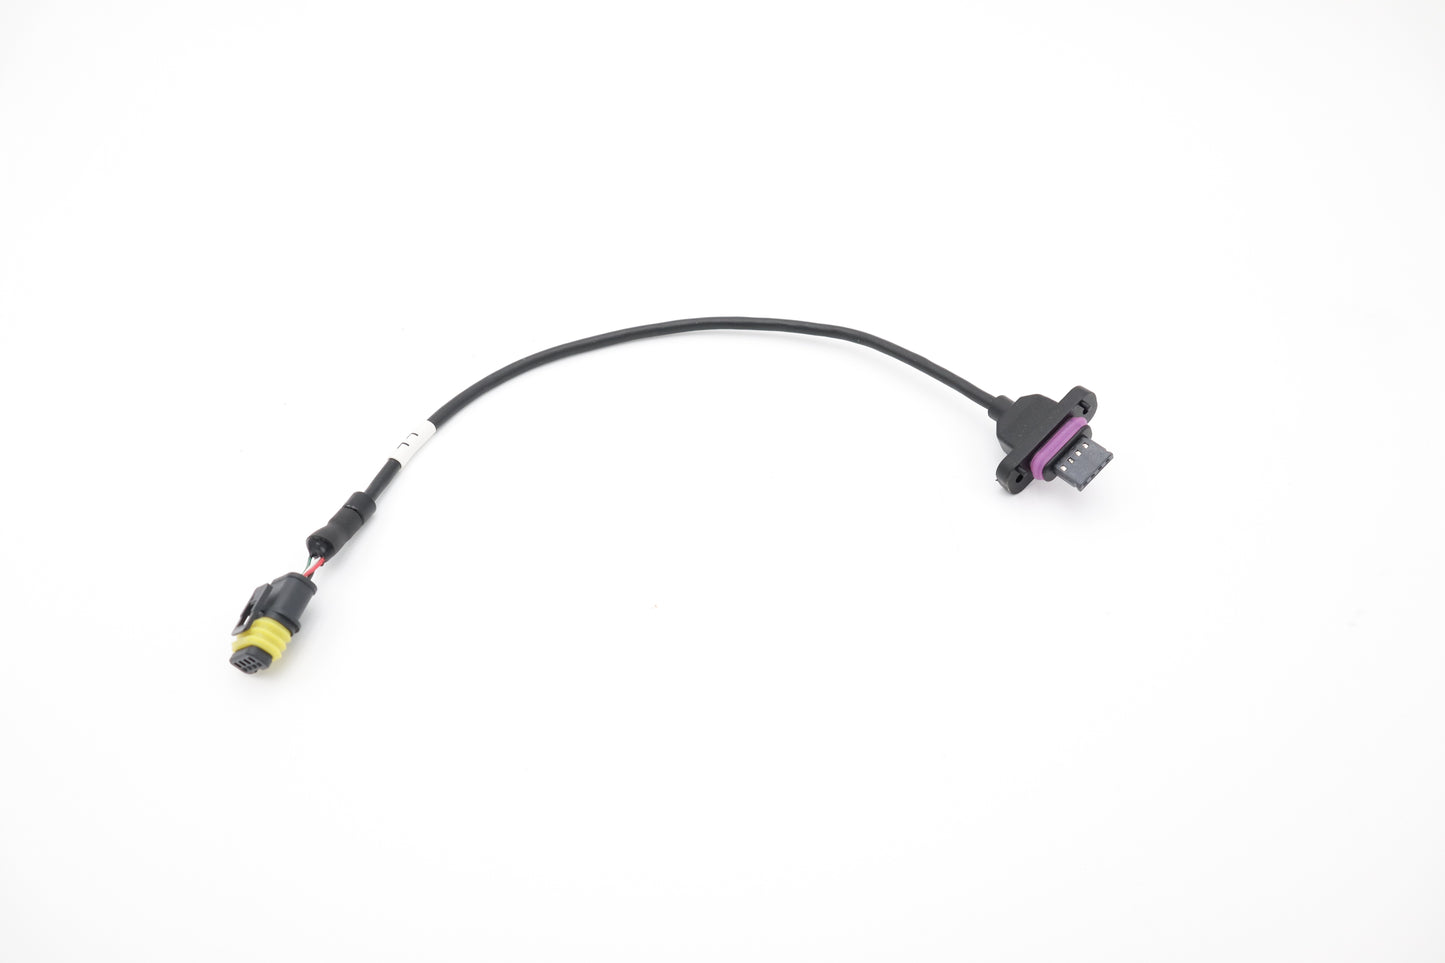 DJI Agras T30 Flow Meter Signal Cable